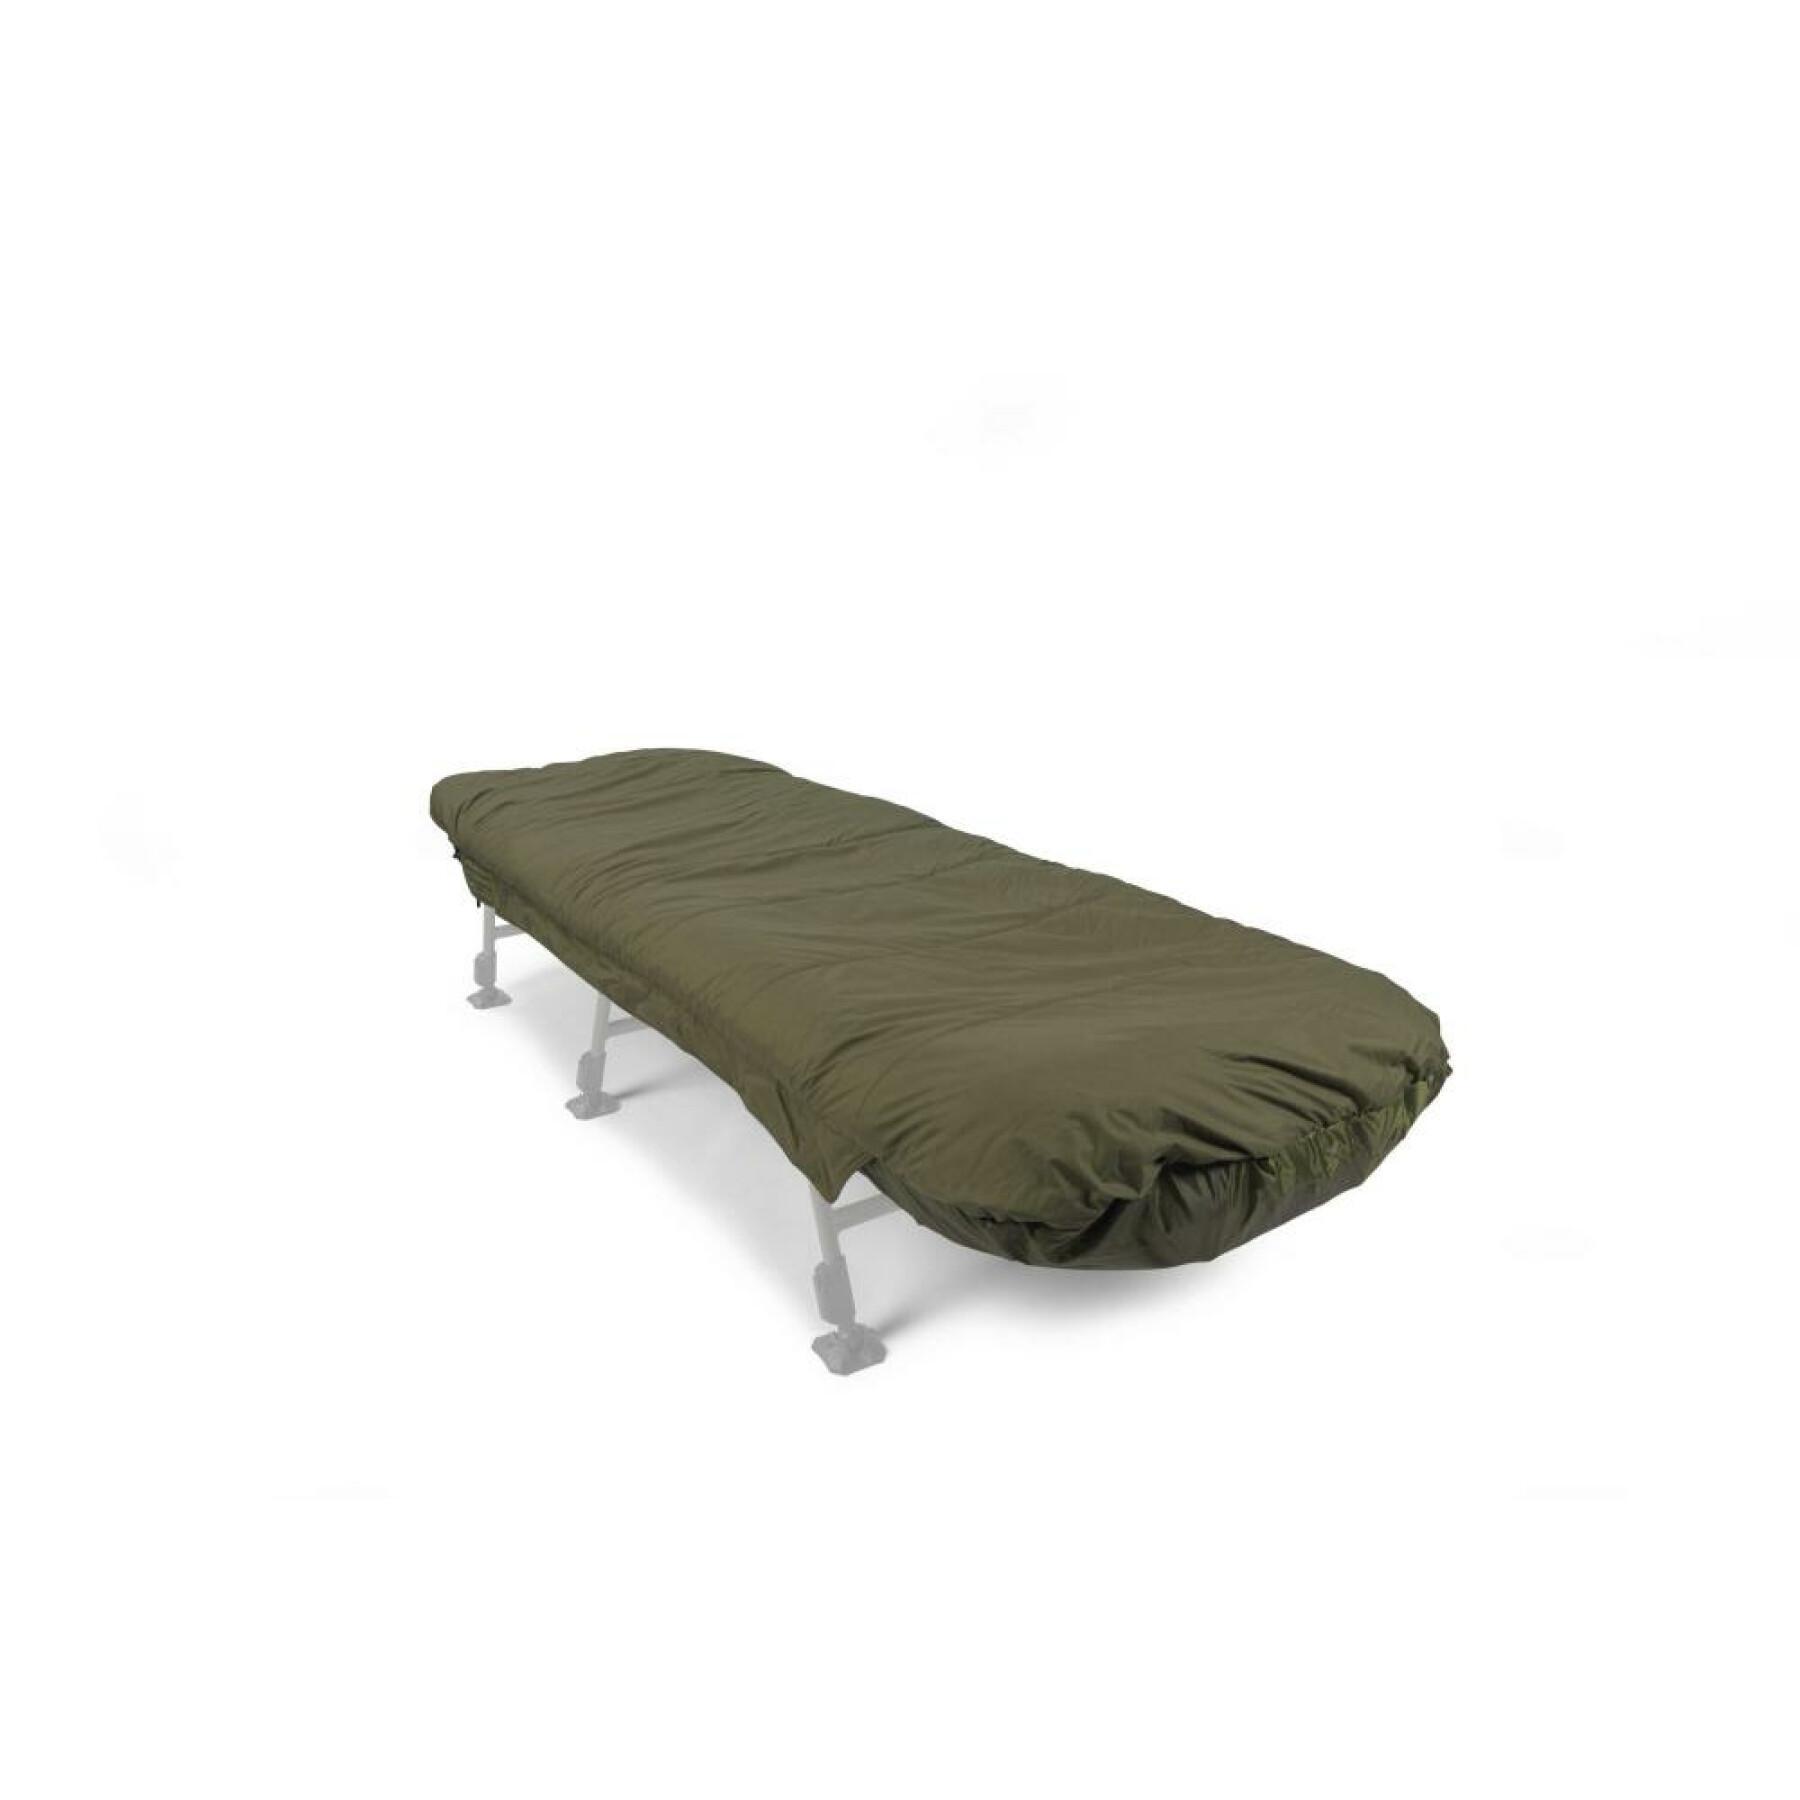 Bed chair Avid benchmark thermatech heated sleeping bag- standard